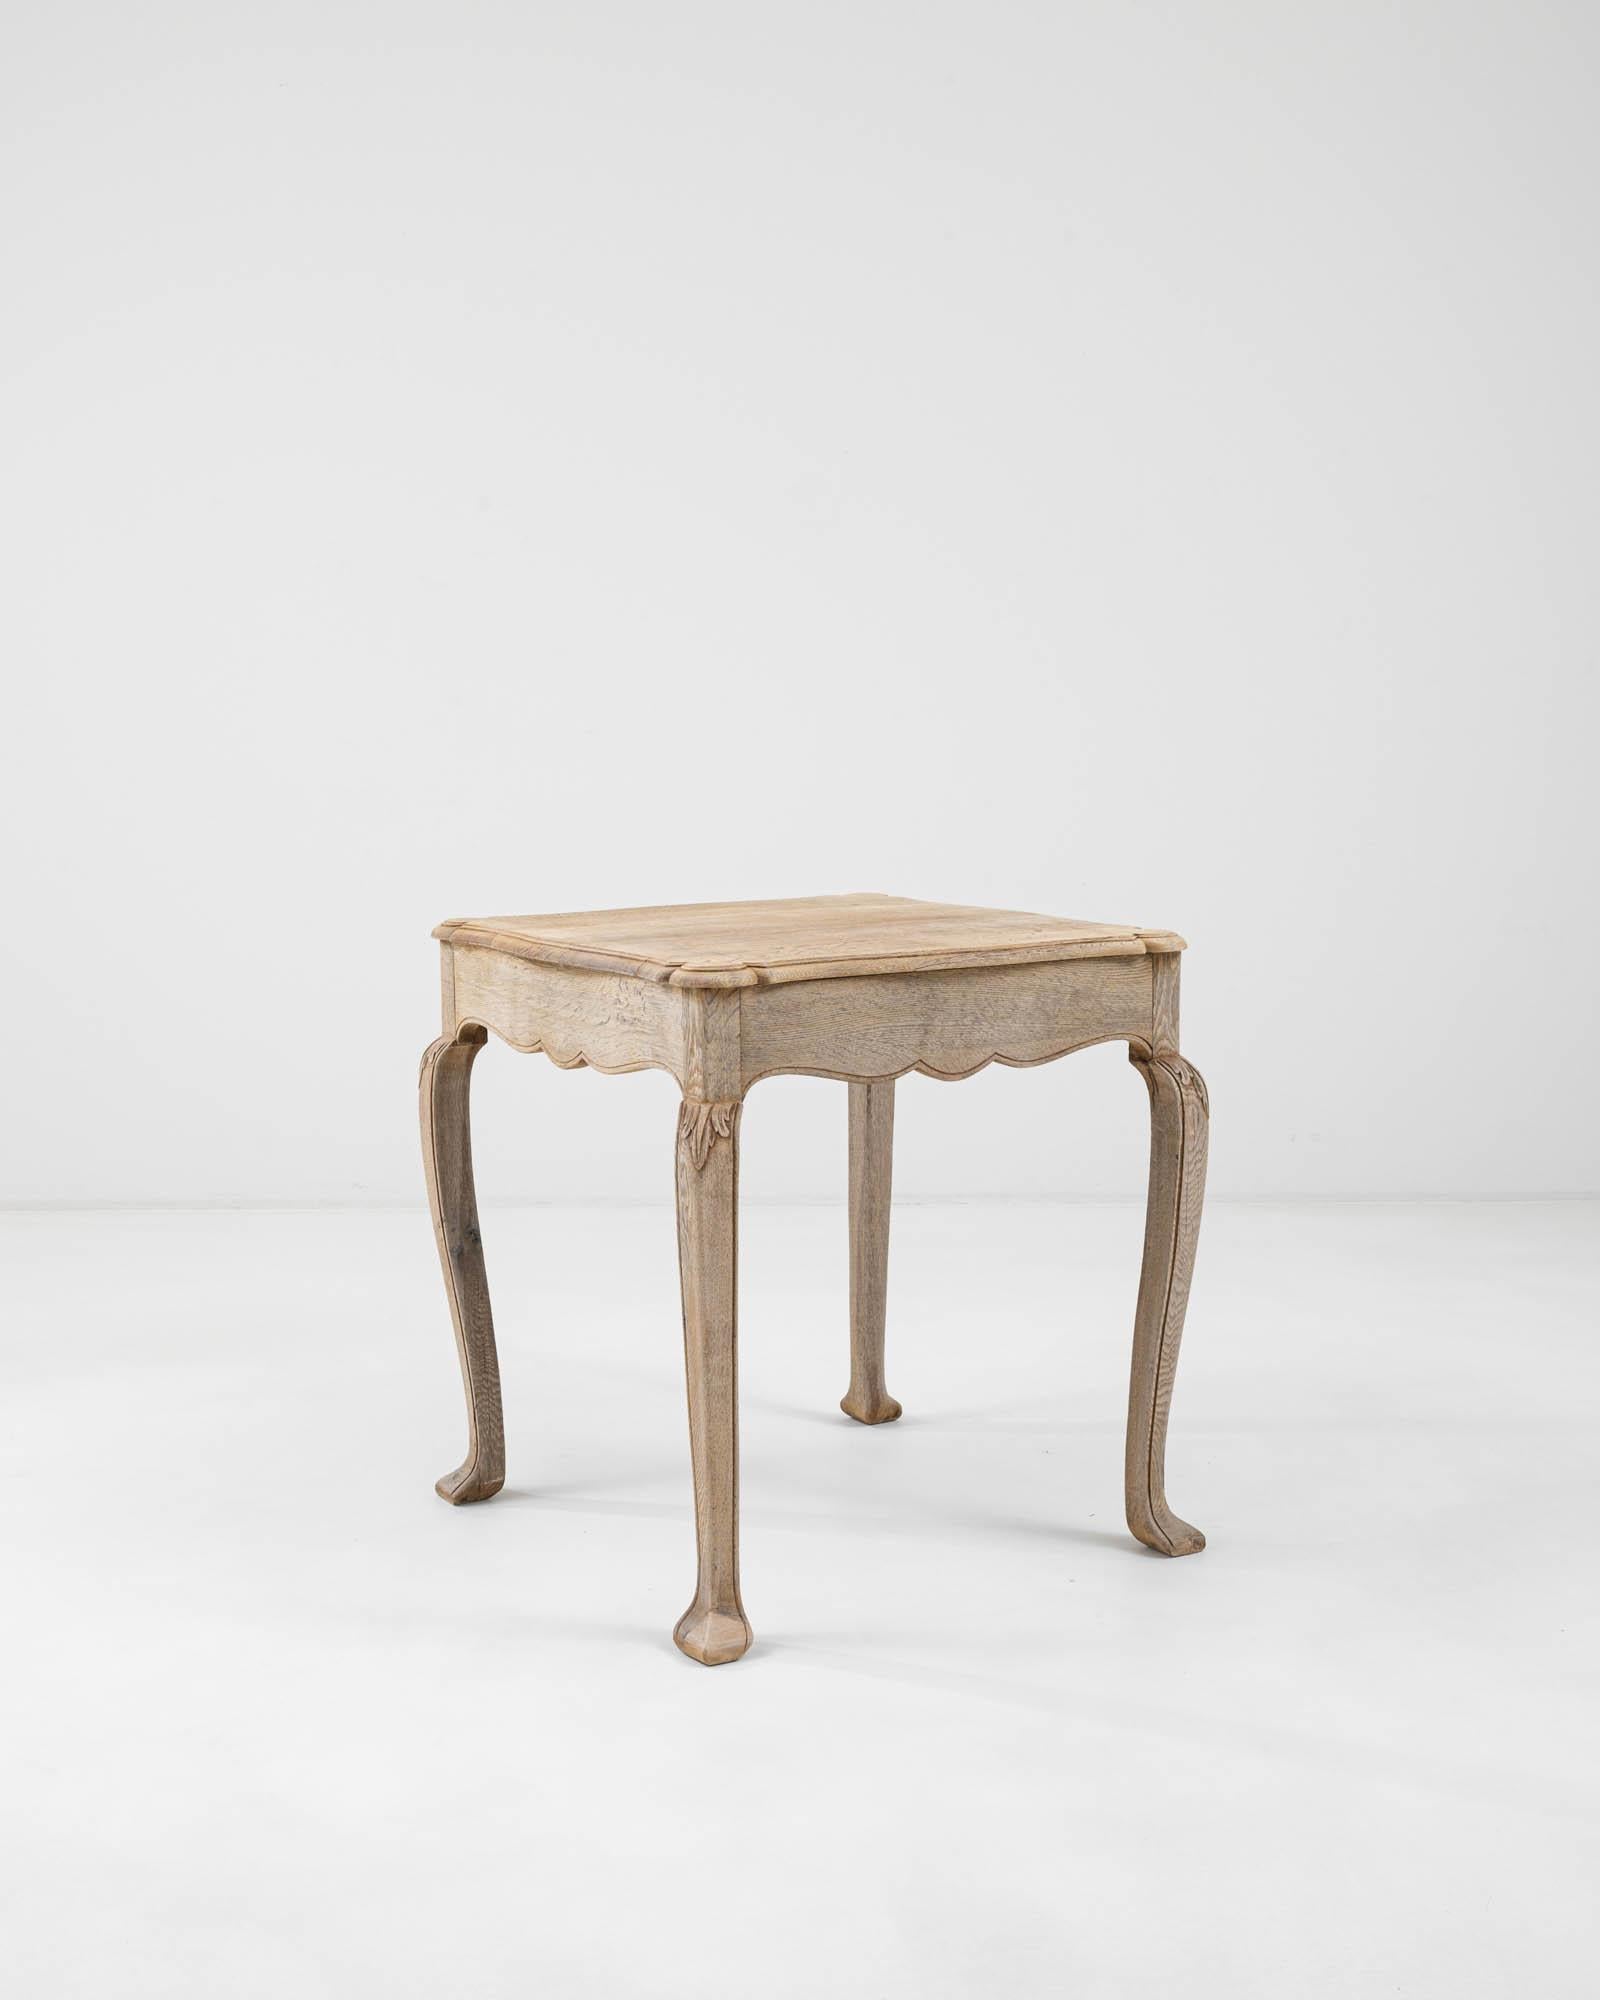 An antique bleached oak table from France with distinctive curved legs. Stylish and practical with a versatile shape, four limbs stretch to support the scalloped apron and a softly beveled tabletop. 
Perched on cabriole legs – the piece imparts a